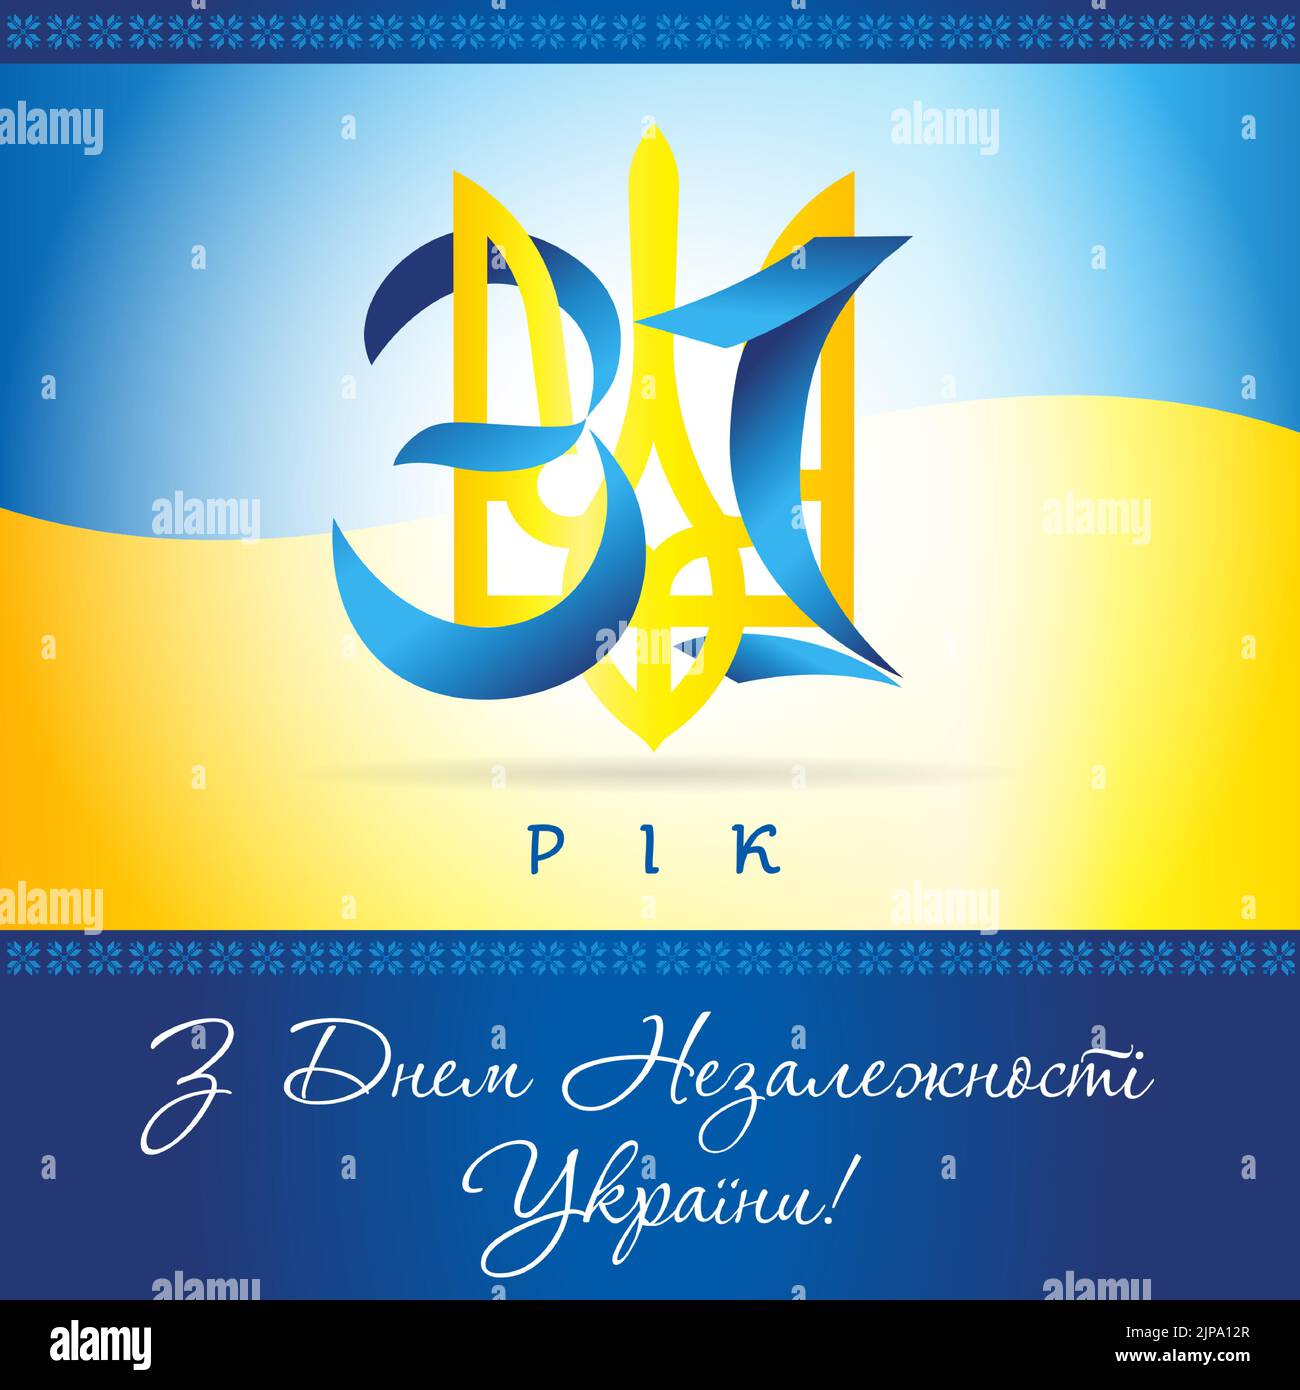 Ukraine Independence Day concept with Ukrainian text - 31 years anniversary Ukraine Independence day. Holiday in Ukraine August 24,  flag and ornament Stock Vector